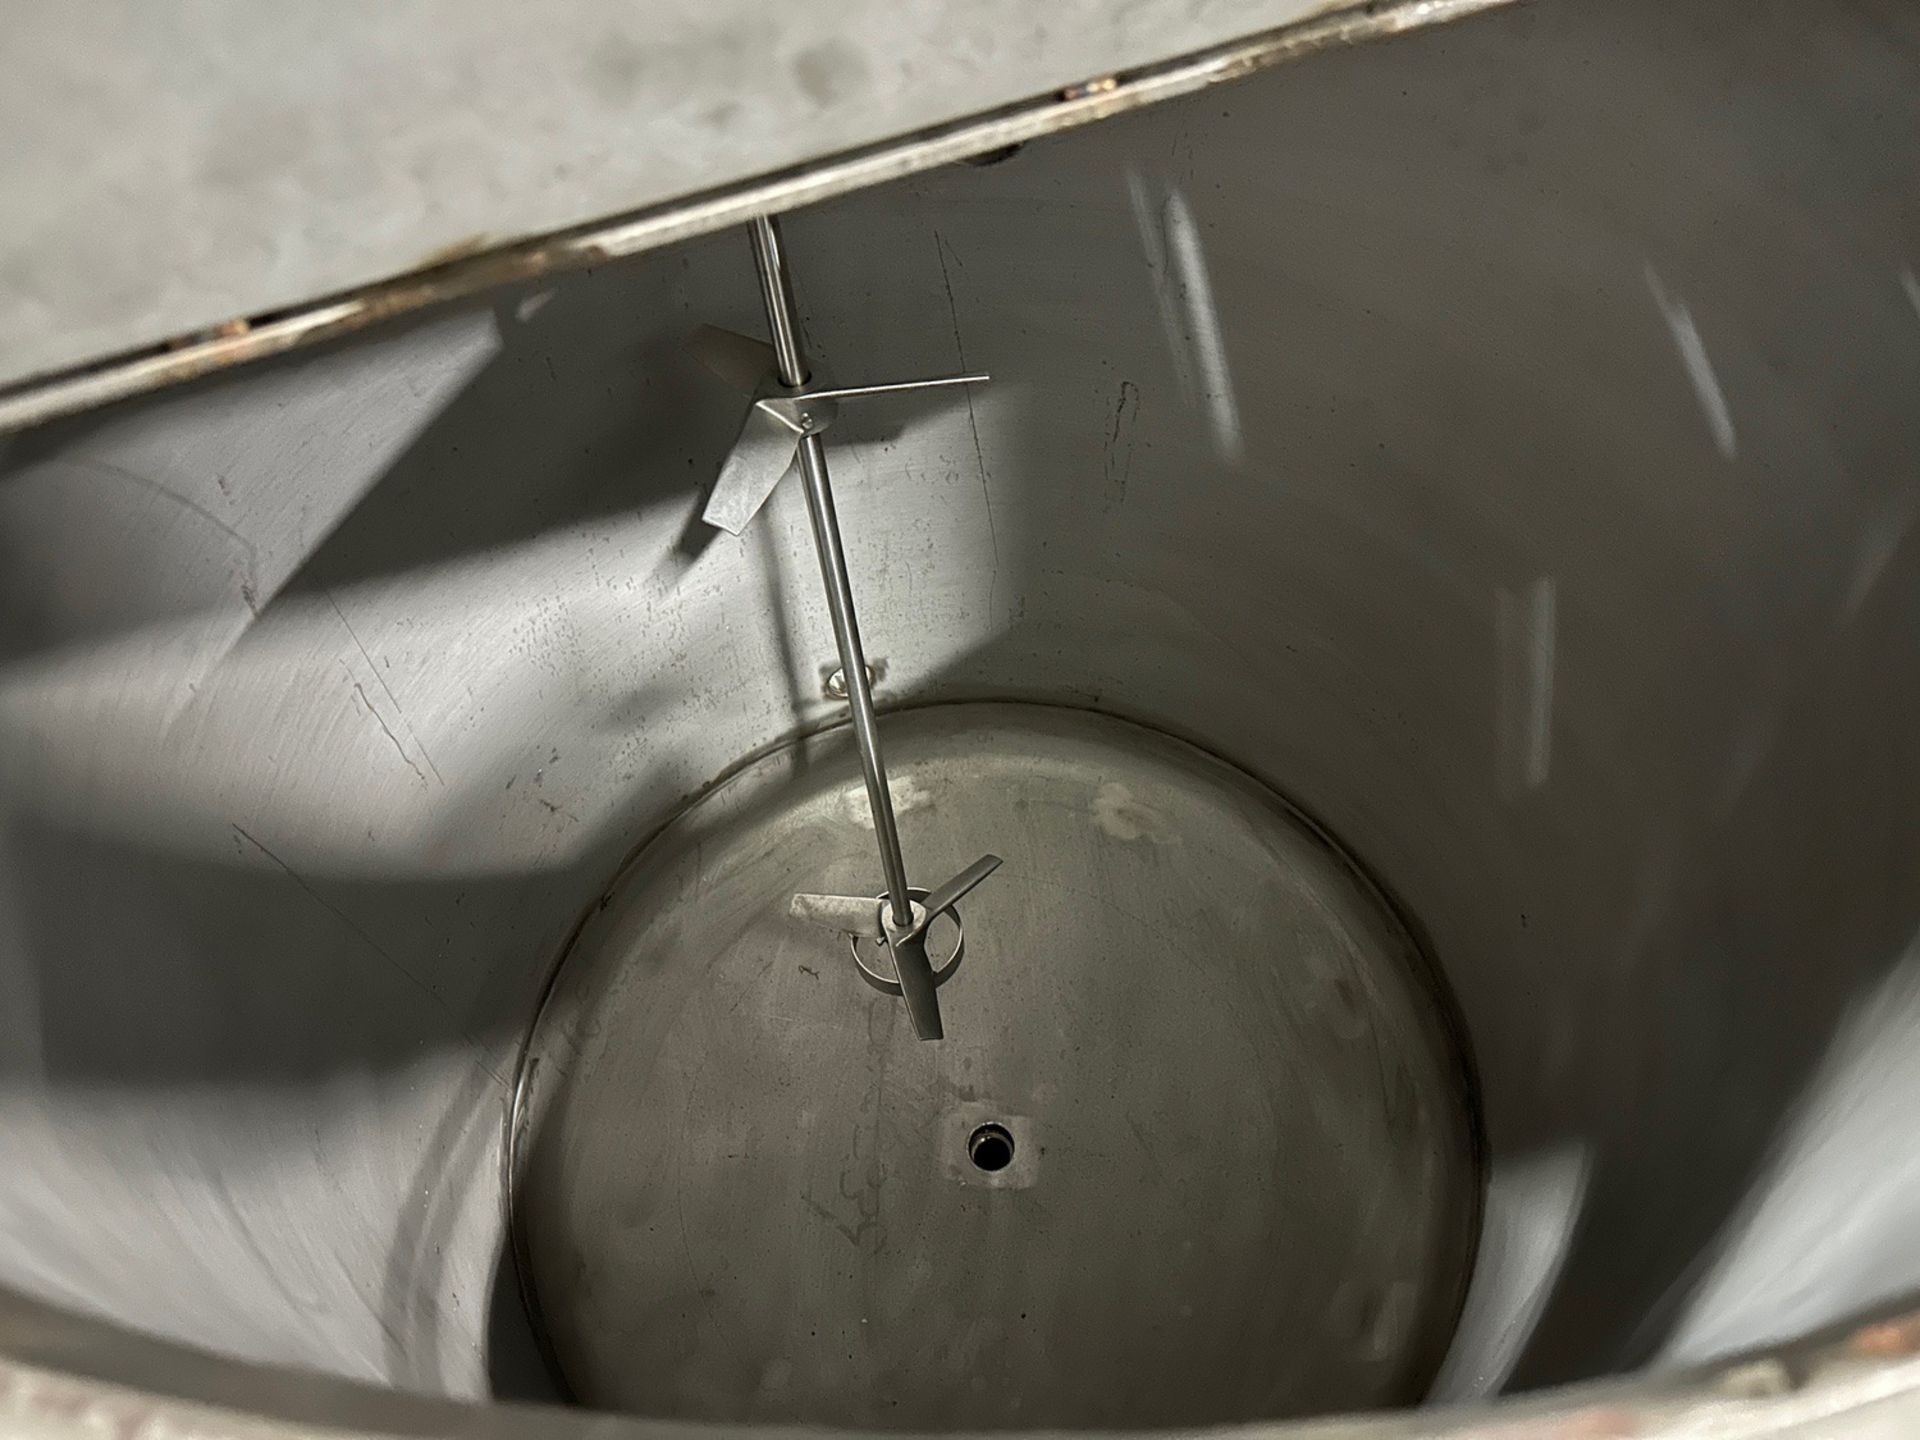 150 Gallon Stainless Steel Mixing Tank with SPX Lightnin Model X5P25 Mixer | Rig Fee $250 - Image 2 of 6